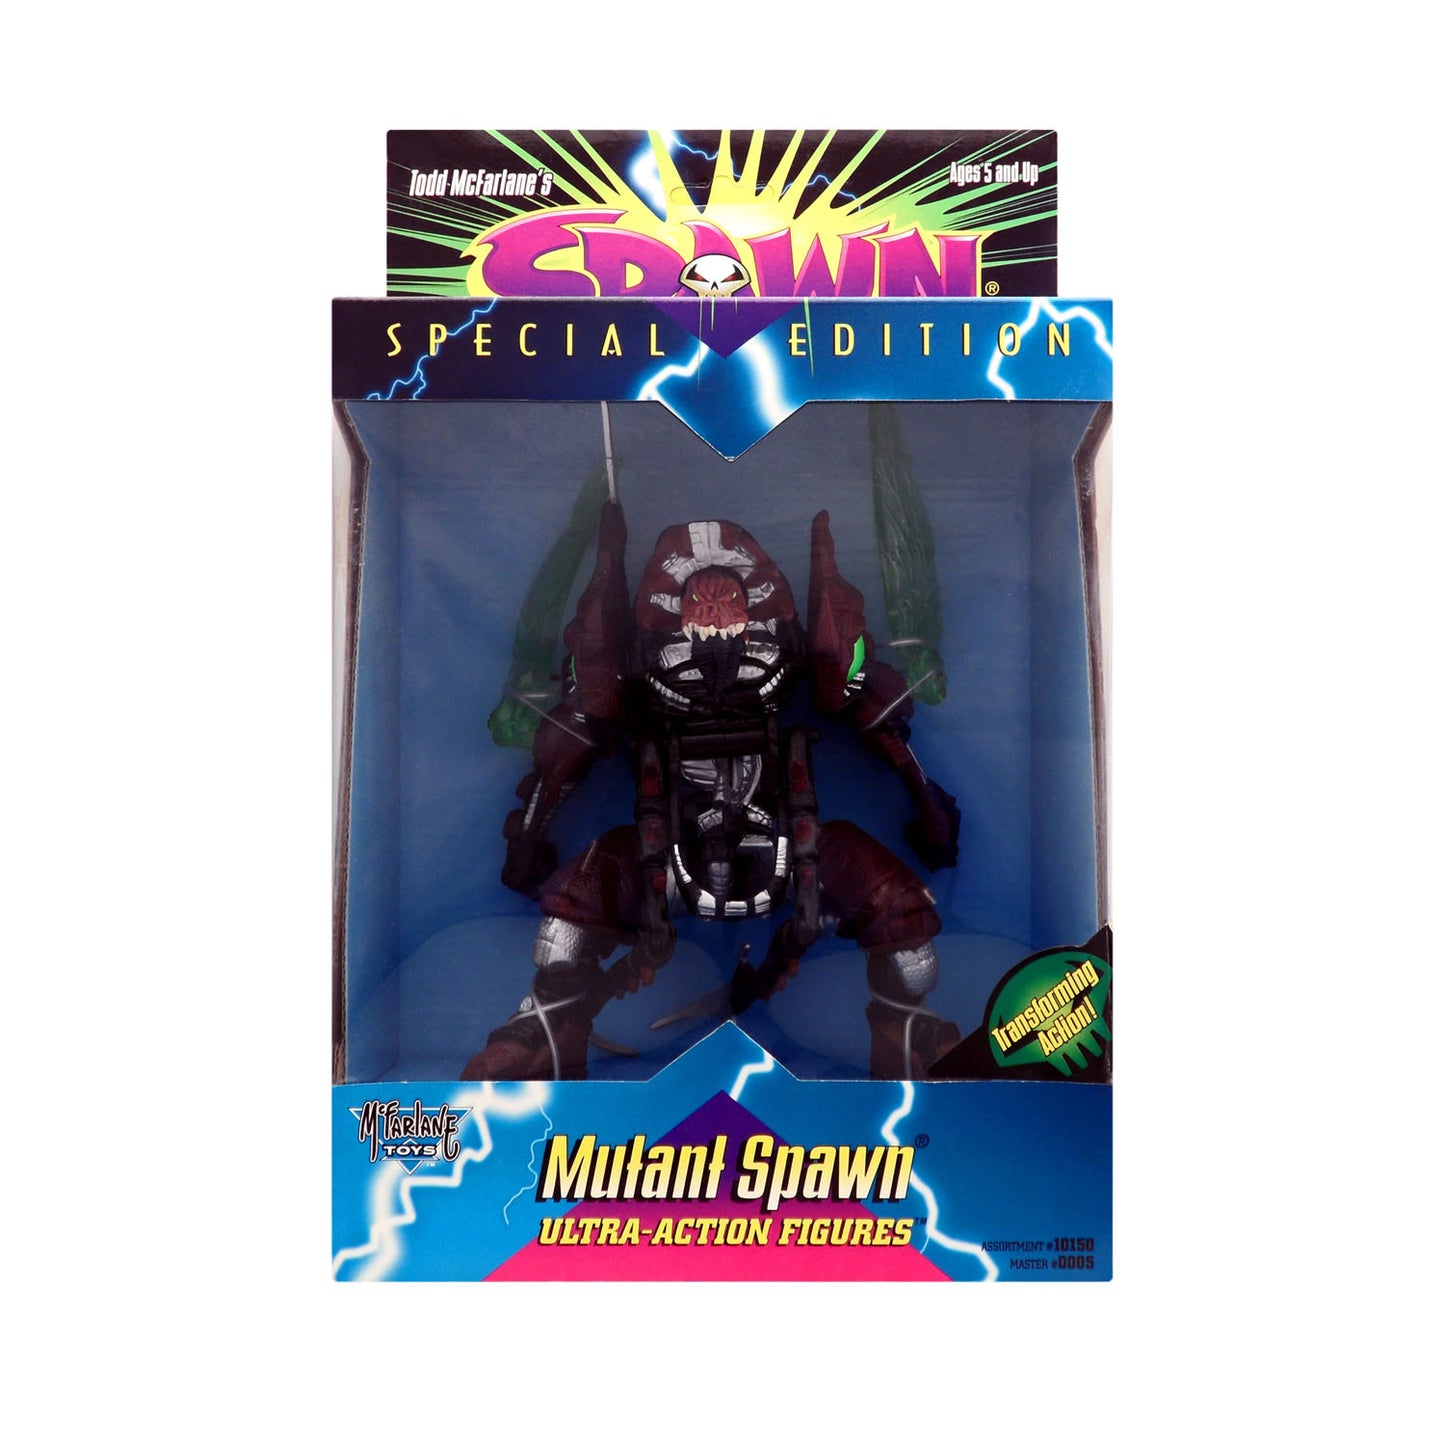 Special Edition Mutant Spawn from Todd McFarlane's Spawn (red-faced variant)